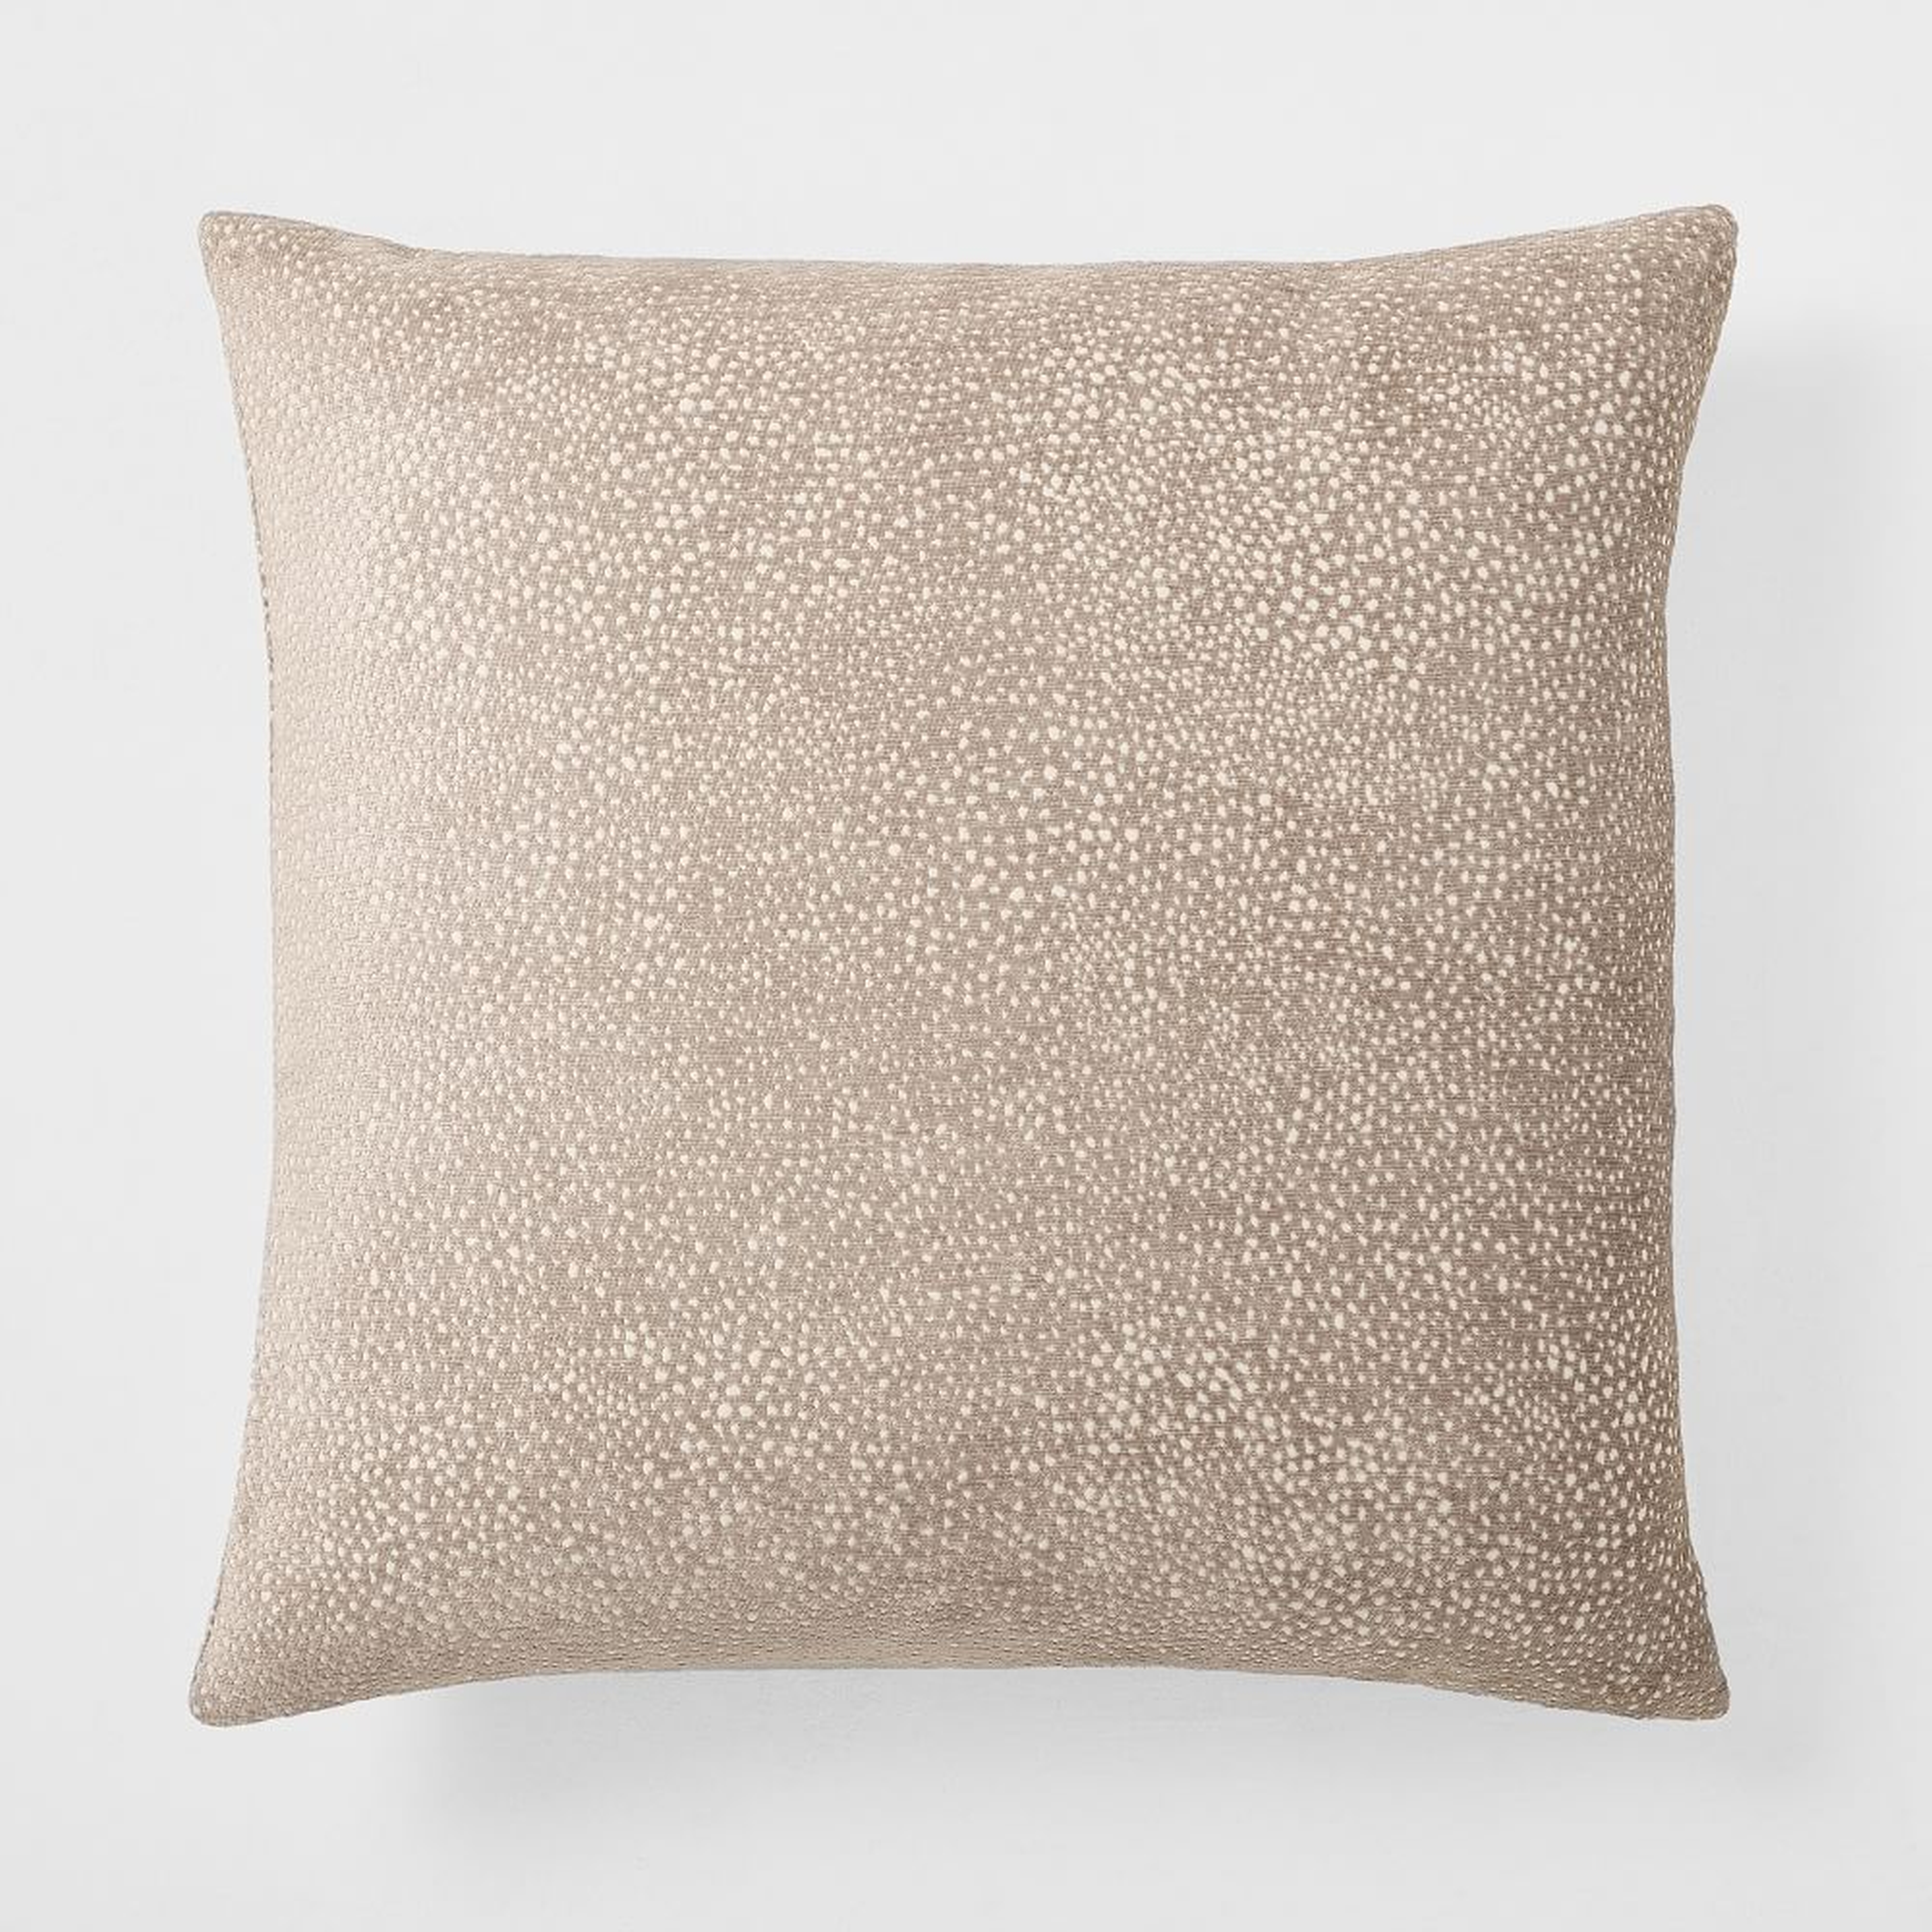 Dotted Chenille Jacquard Pillow Cover, Dark Tan, 20x20, Set of 2 - West Elm